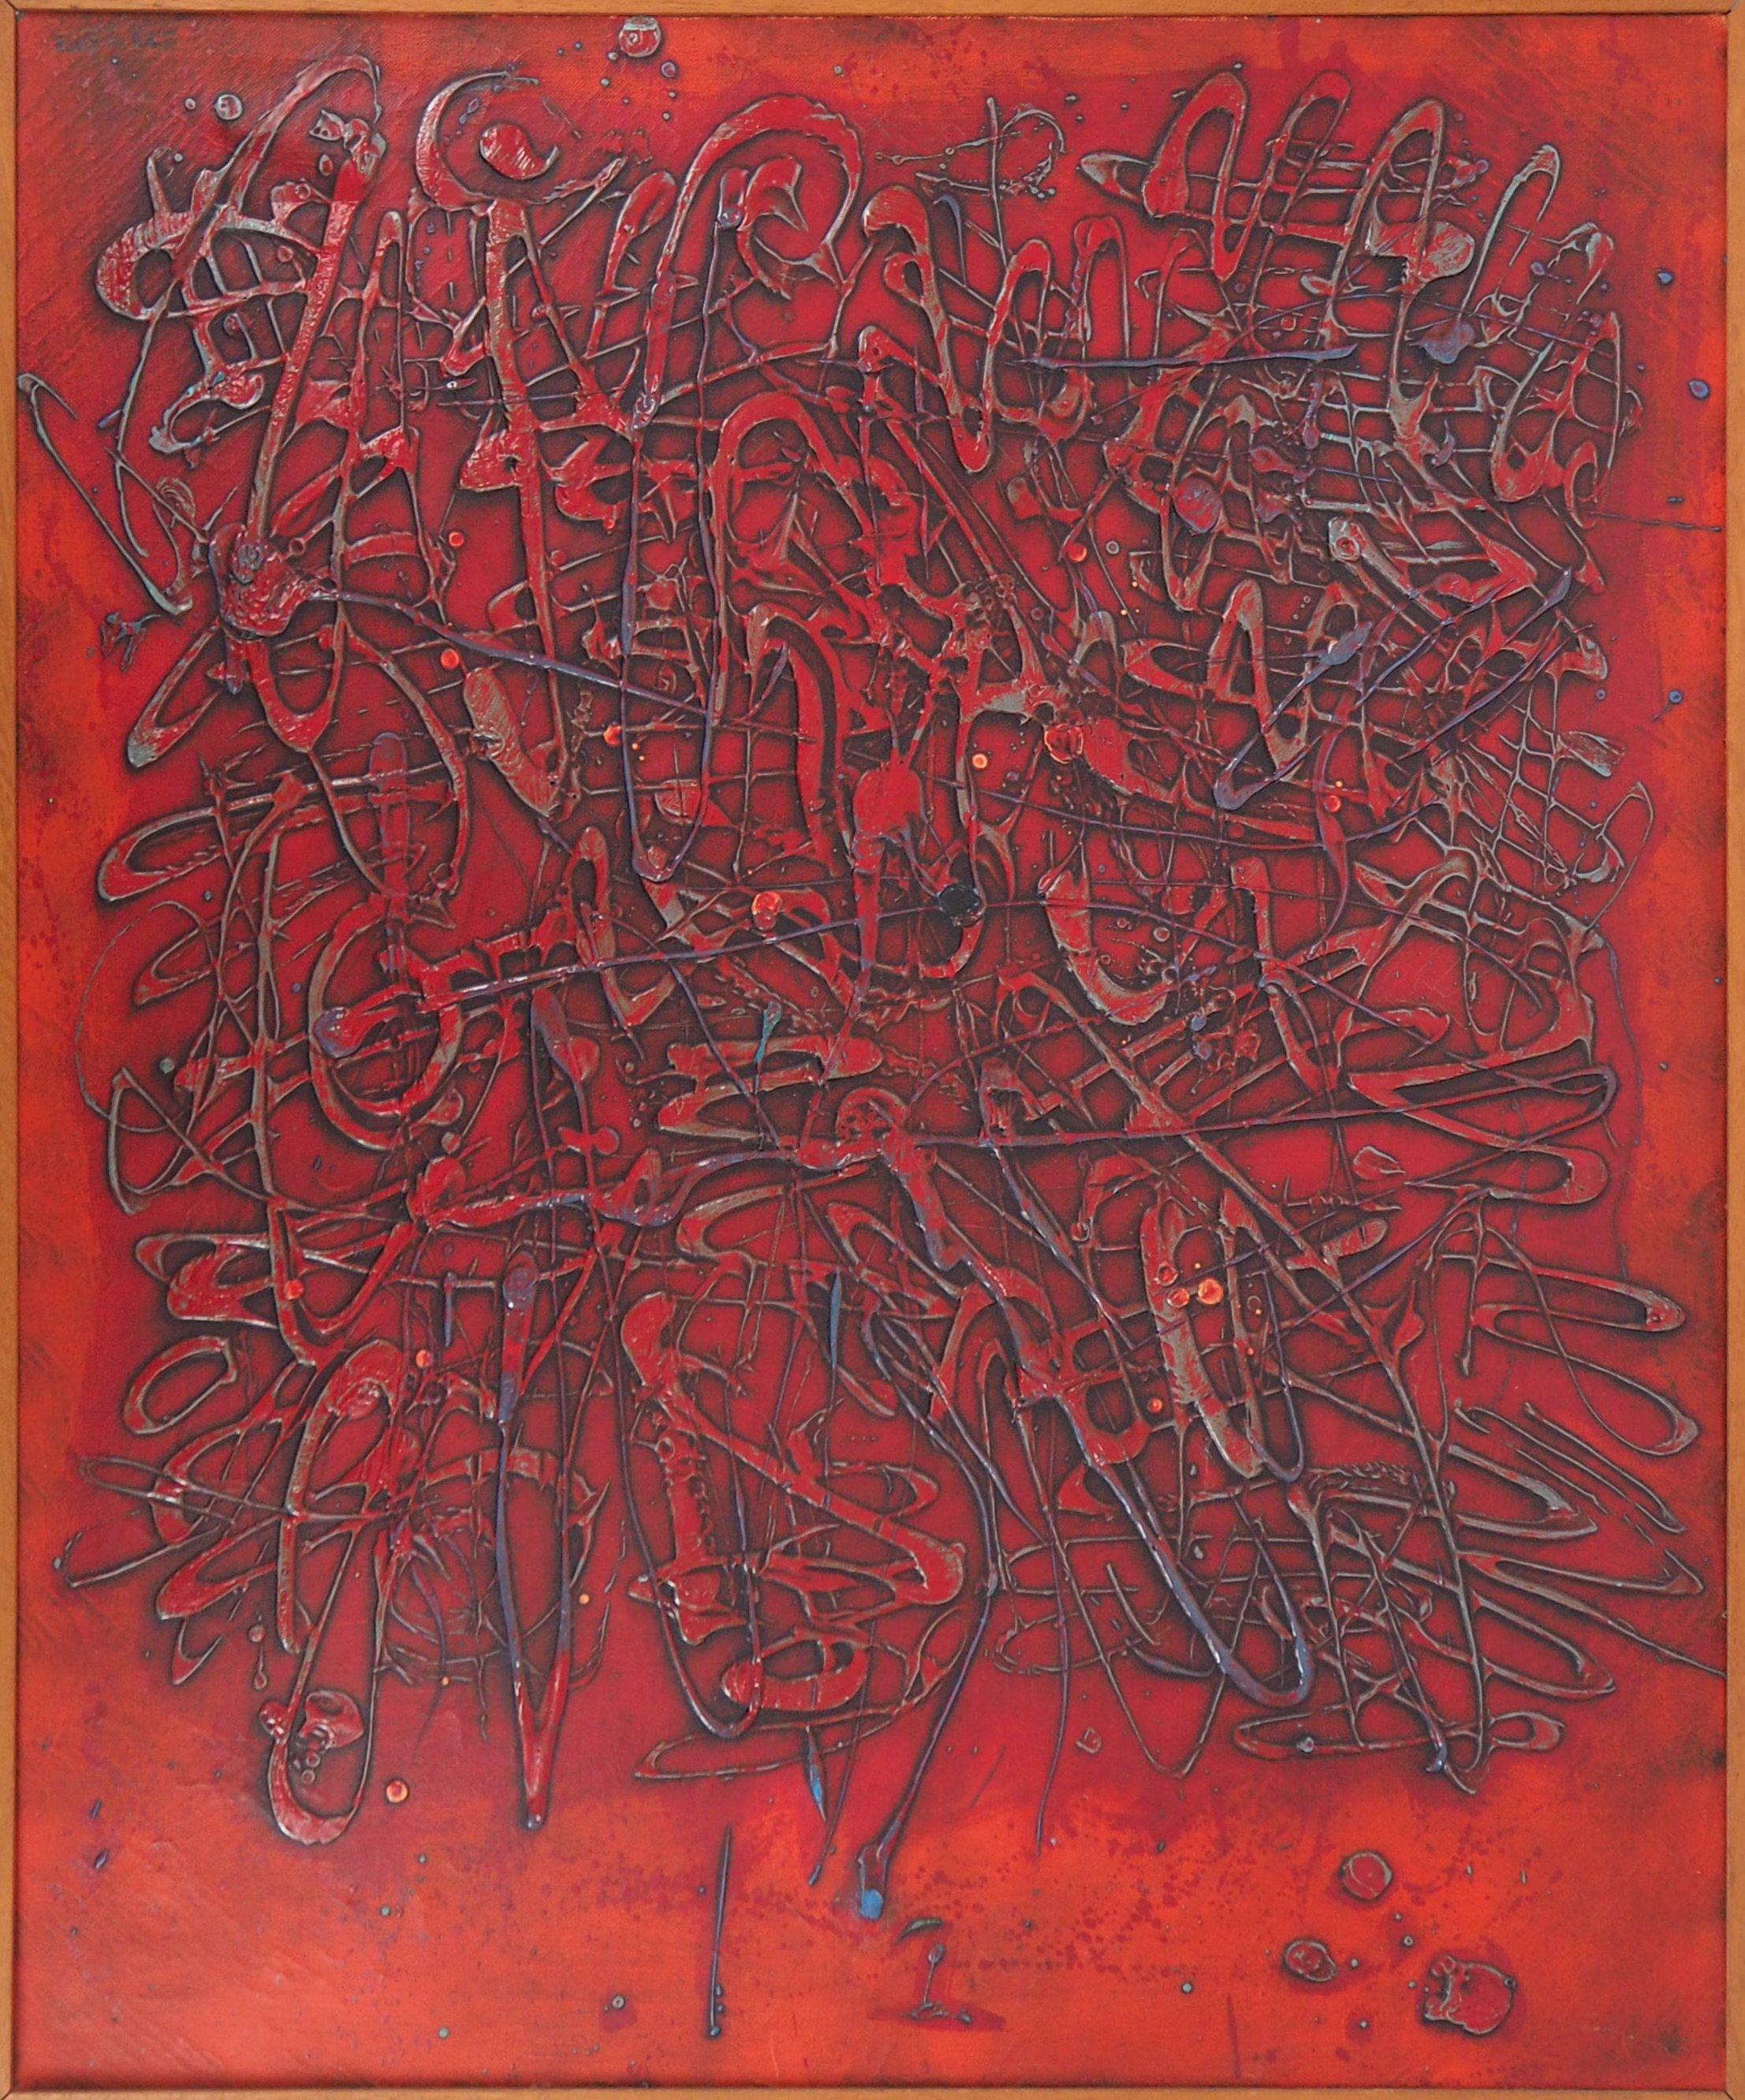 Abstraction in Red - Original oil on canvas - Signed - Painting by Jean Rustin